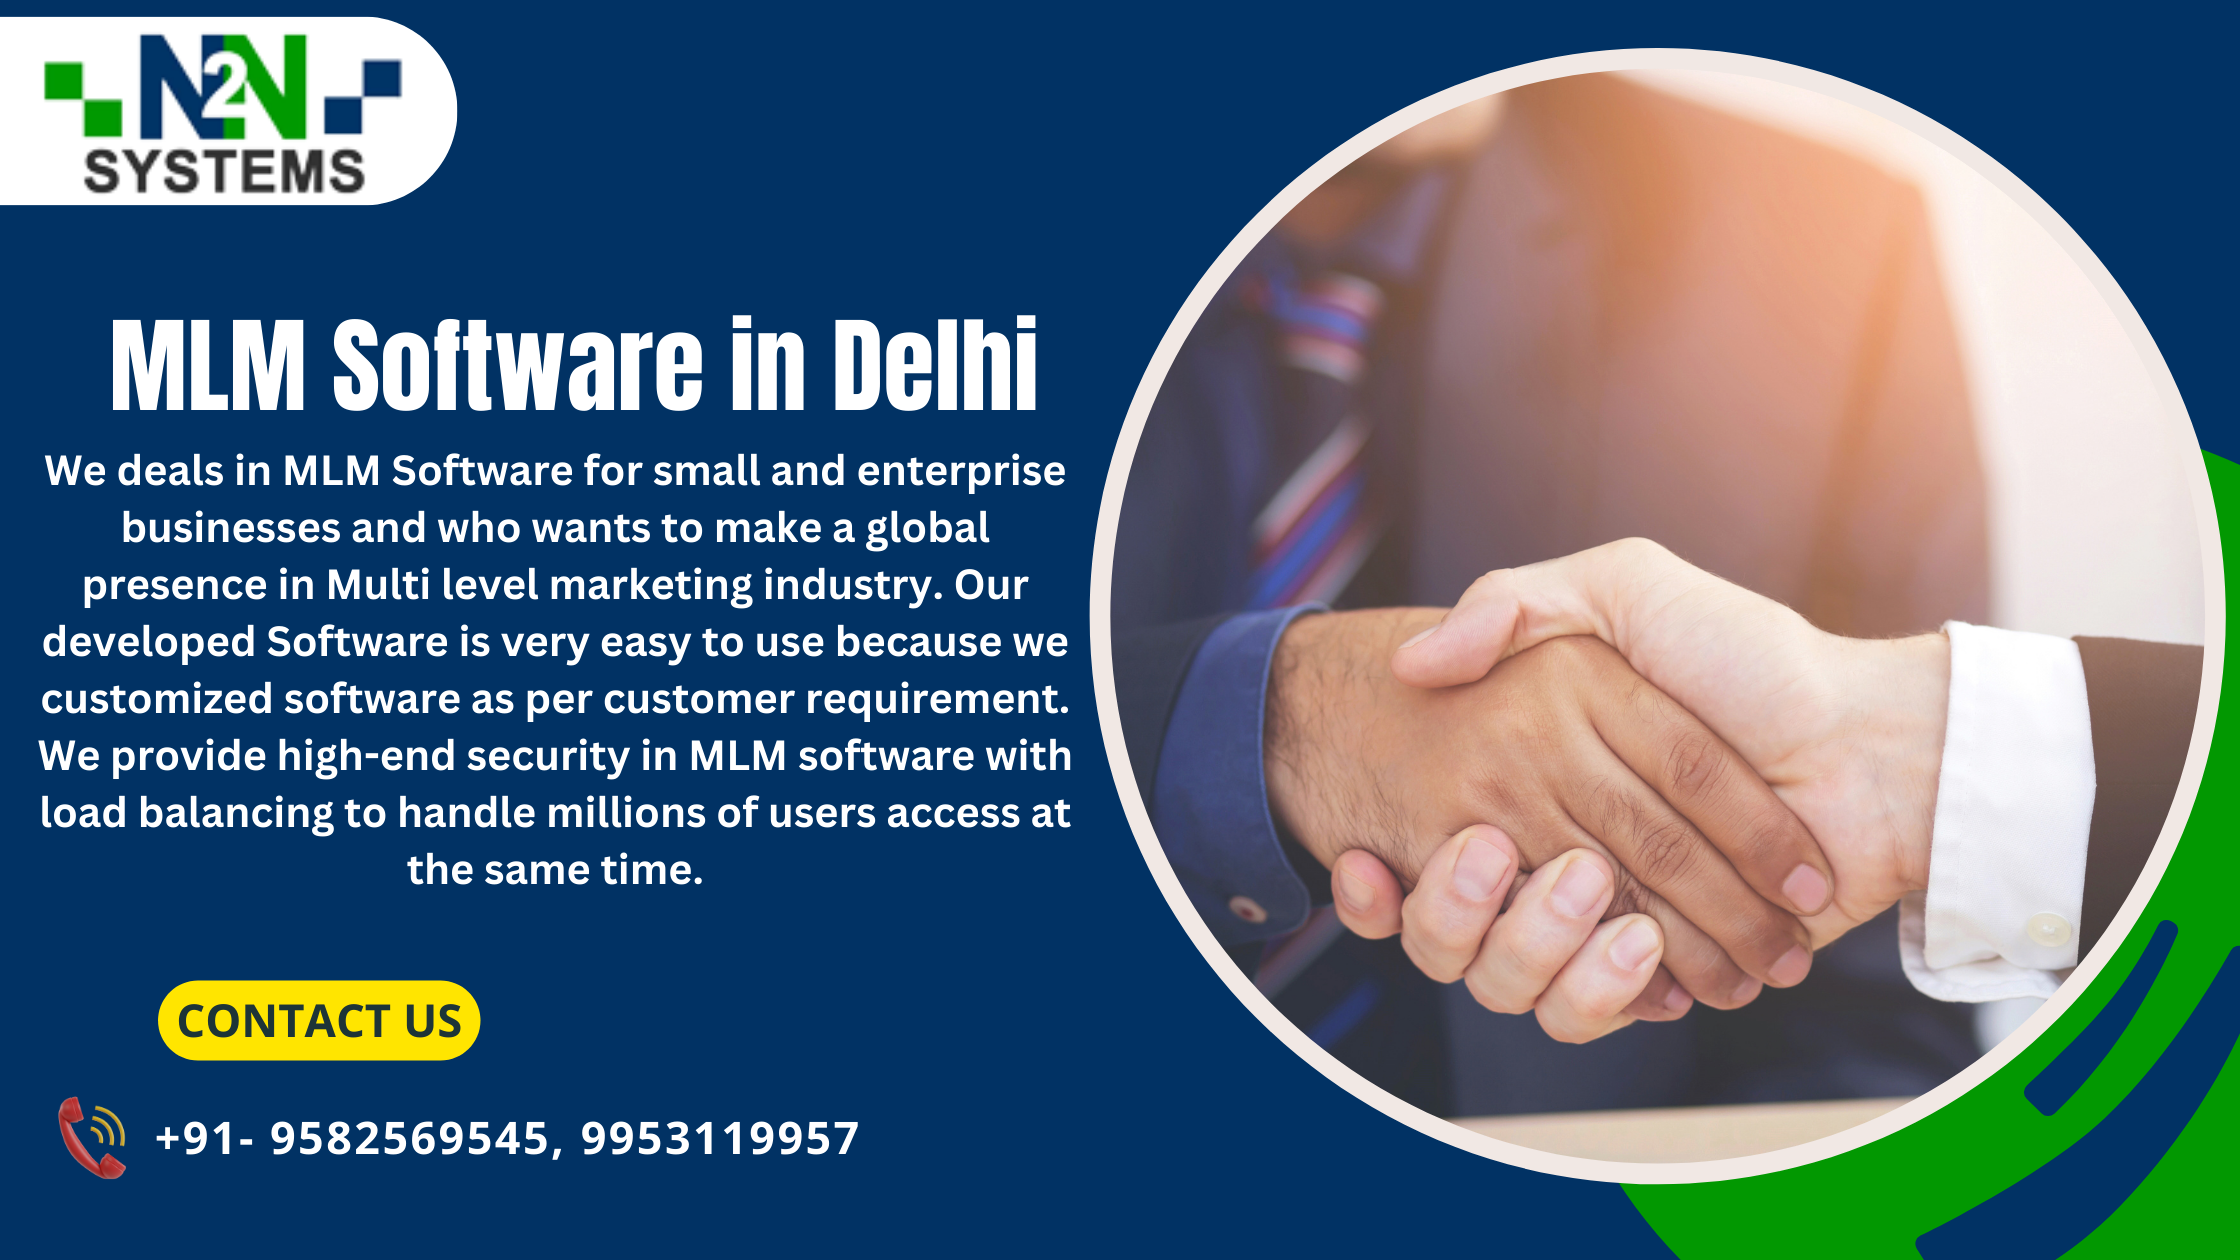 MLM Software in Delhi: Empowering Your Network Marketing Business.